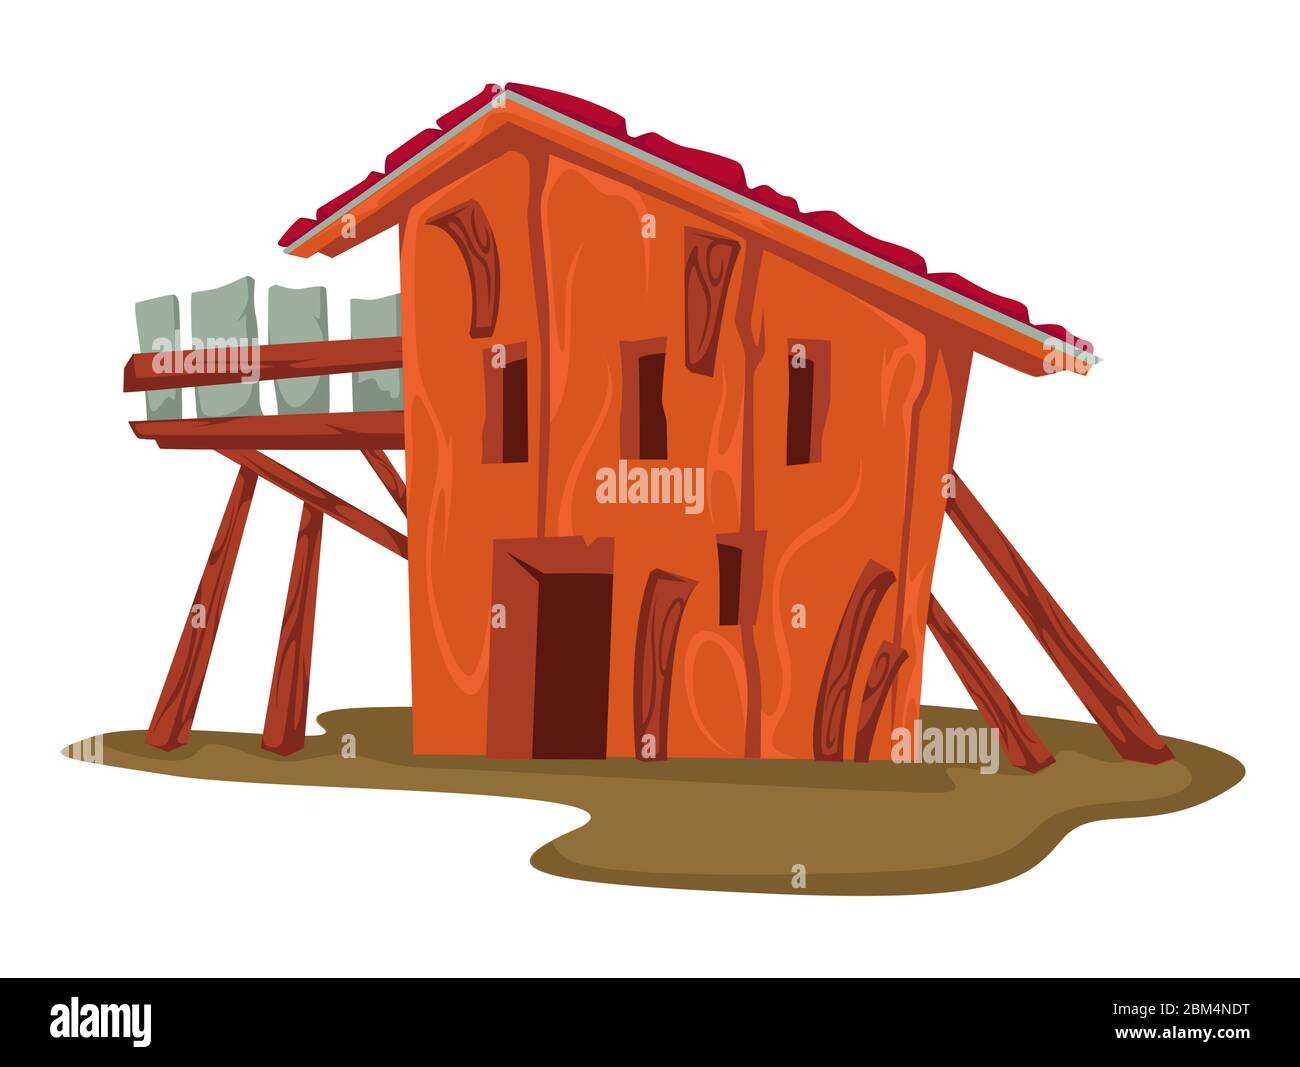 Wooden hut or house, rural building or barn Stock Vector